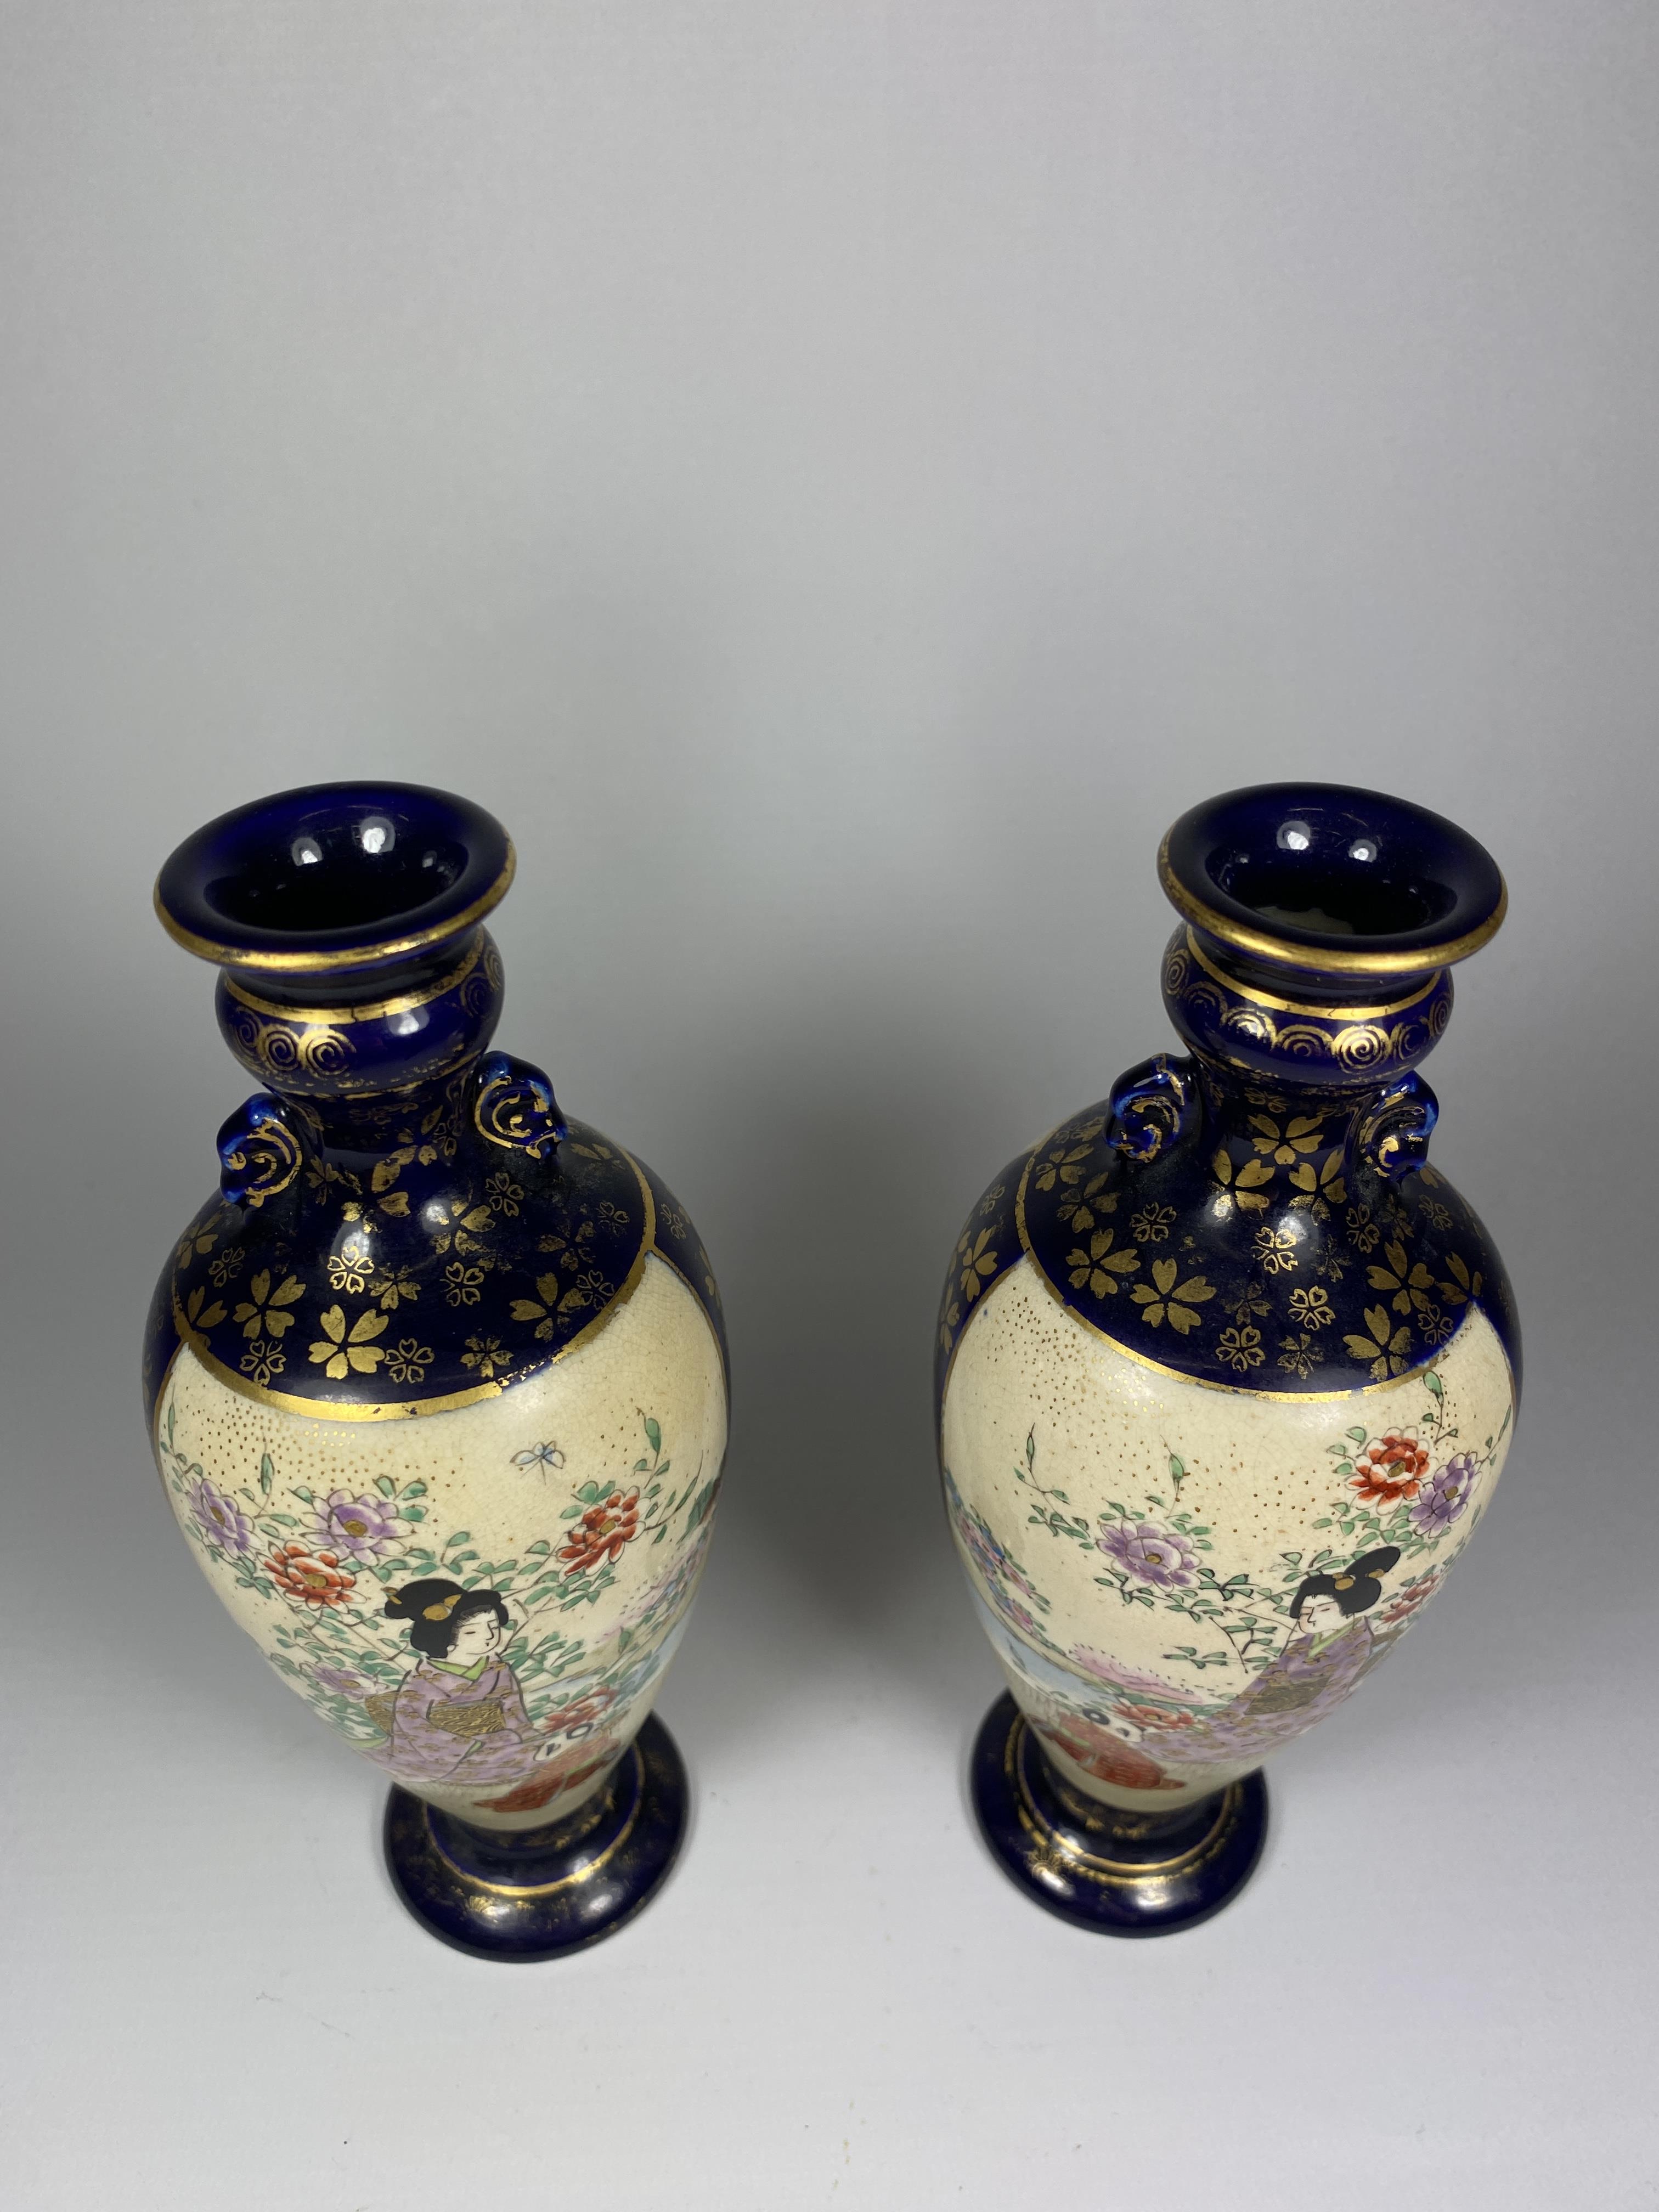 A PAIR OF JAPANESE SATSUMA MEIJI PERIOD (1868-1912) POTTERY VASES, HEIGHT 18CM - Image 2 of 5